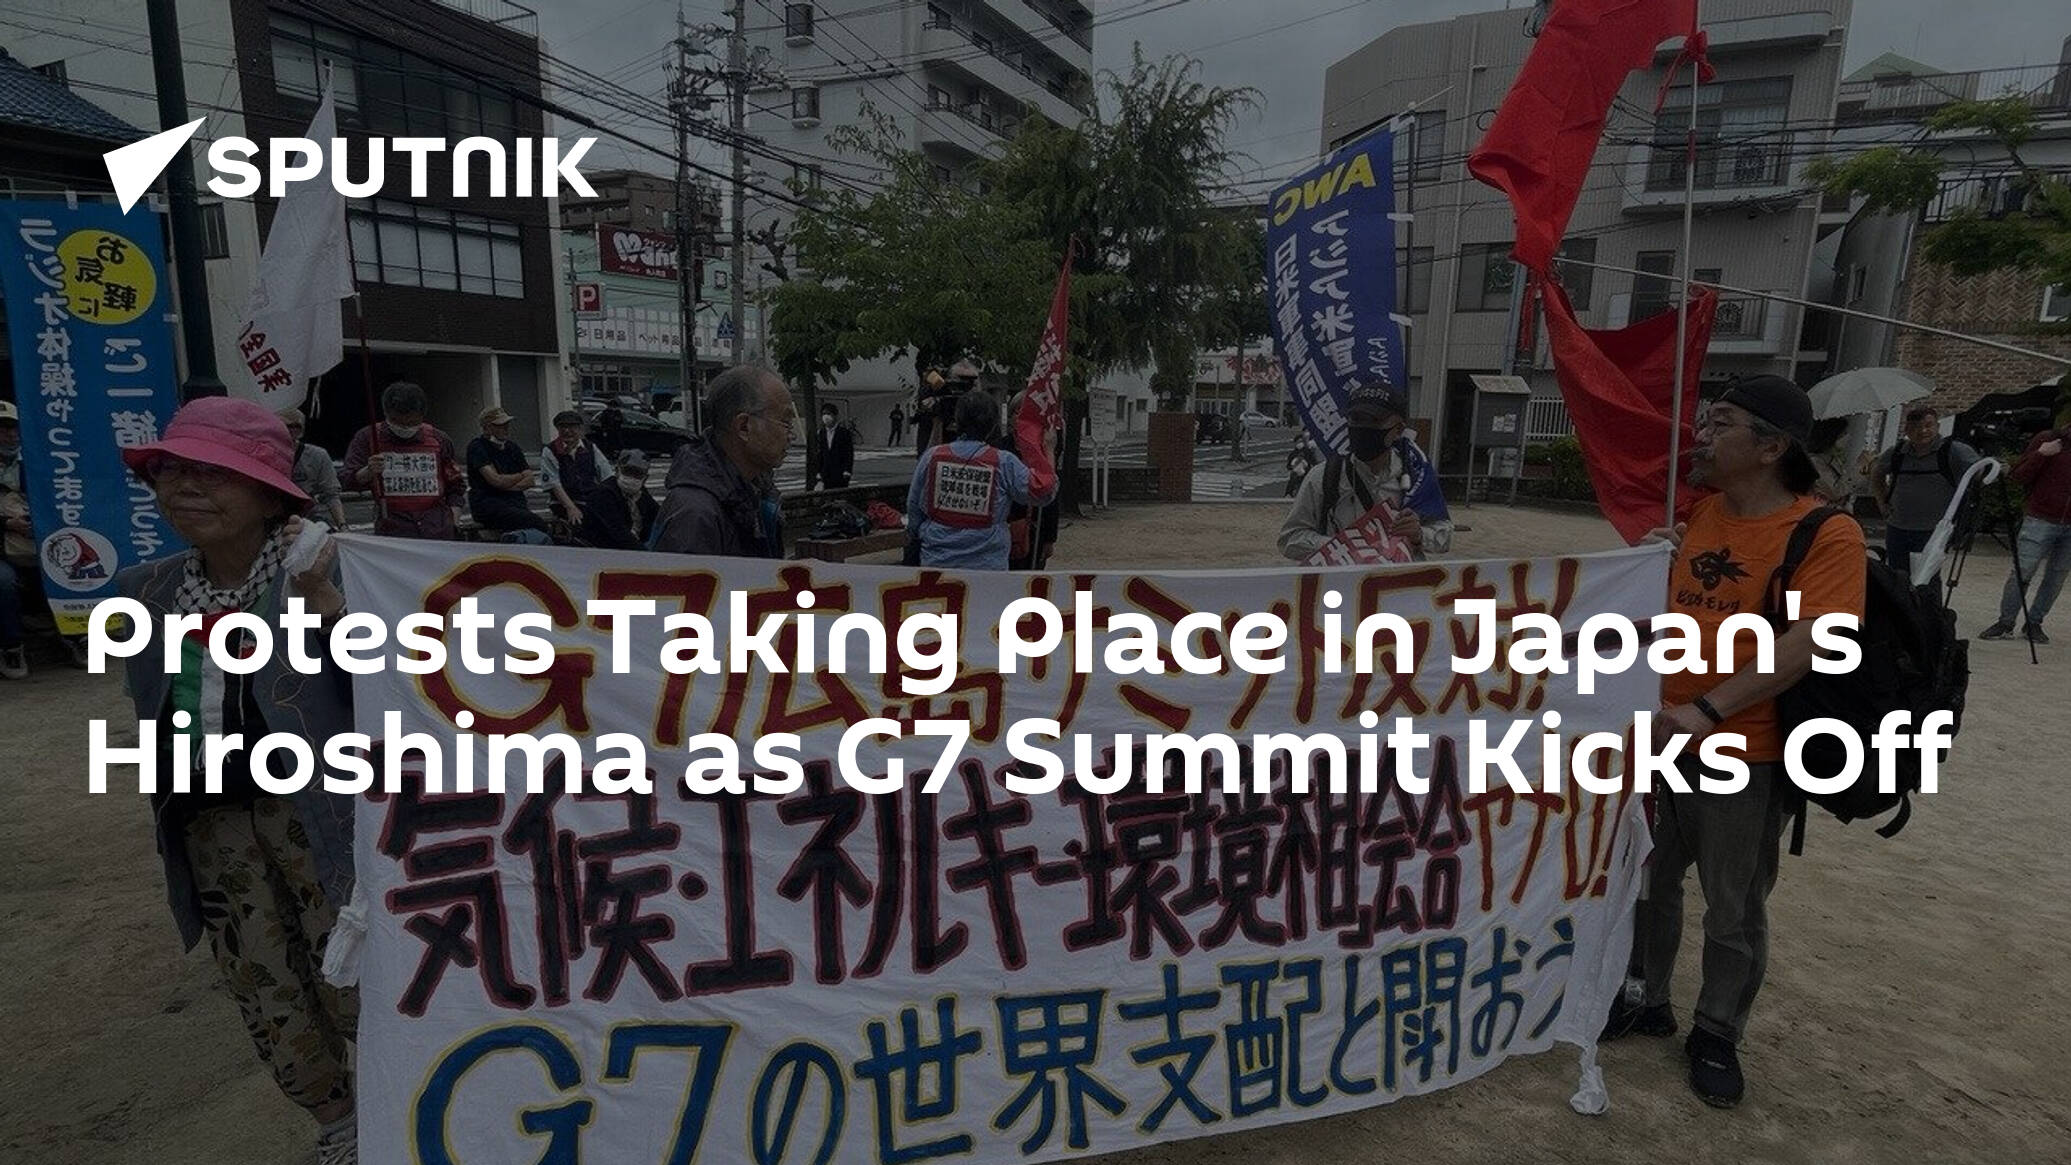 Protests Taking Place in Japan's Hiroshima as G7 Summit Kicks Off